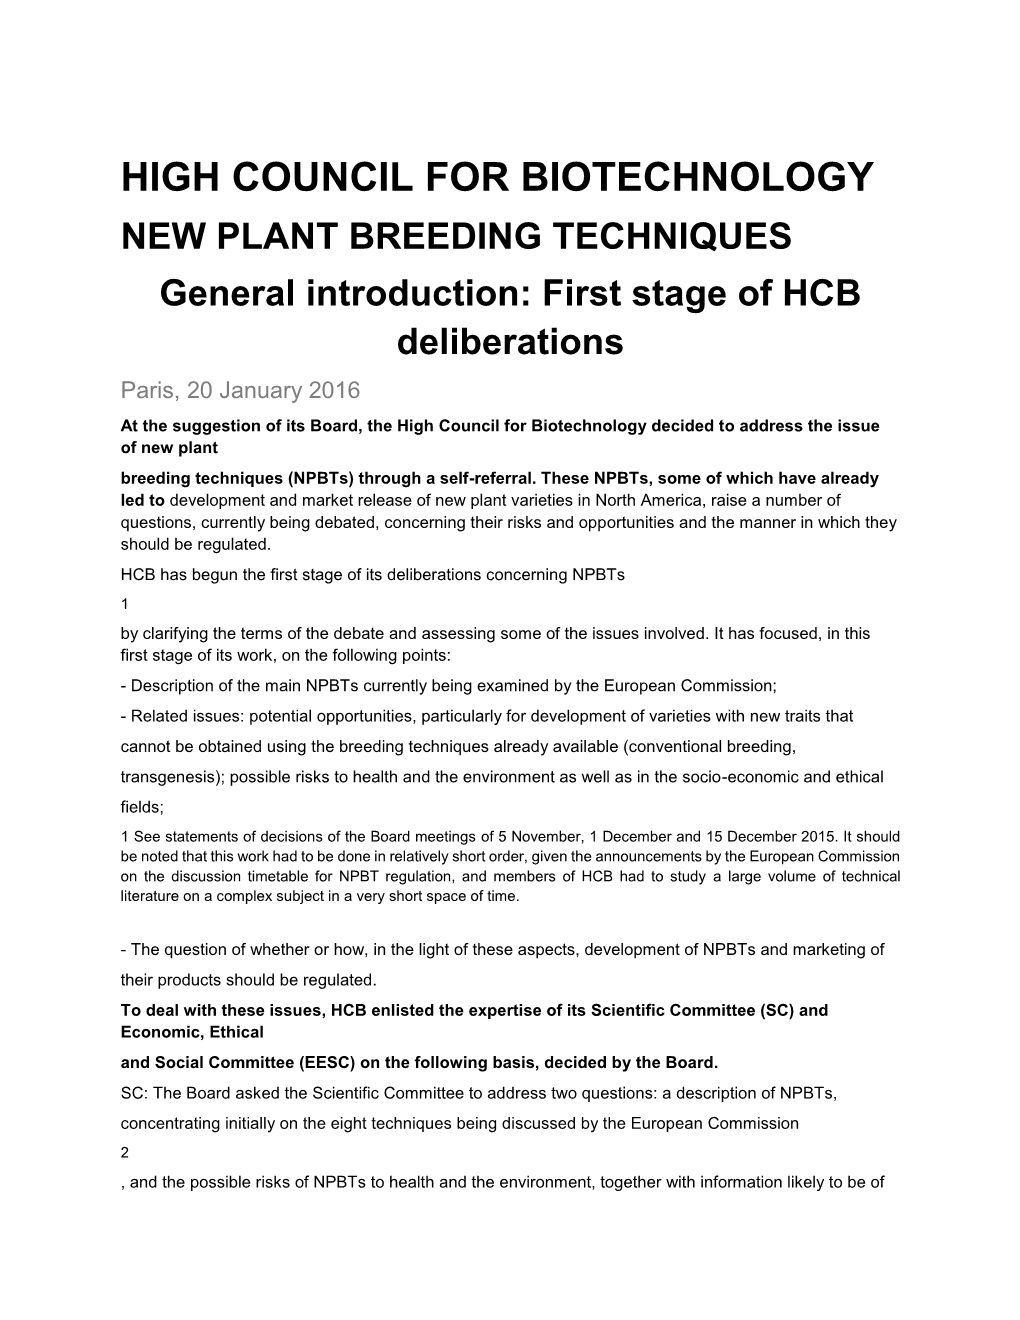 High Council for Biotechnology